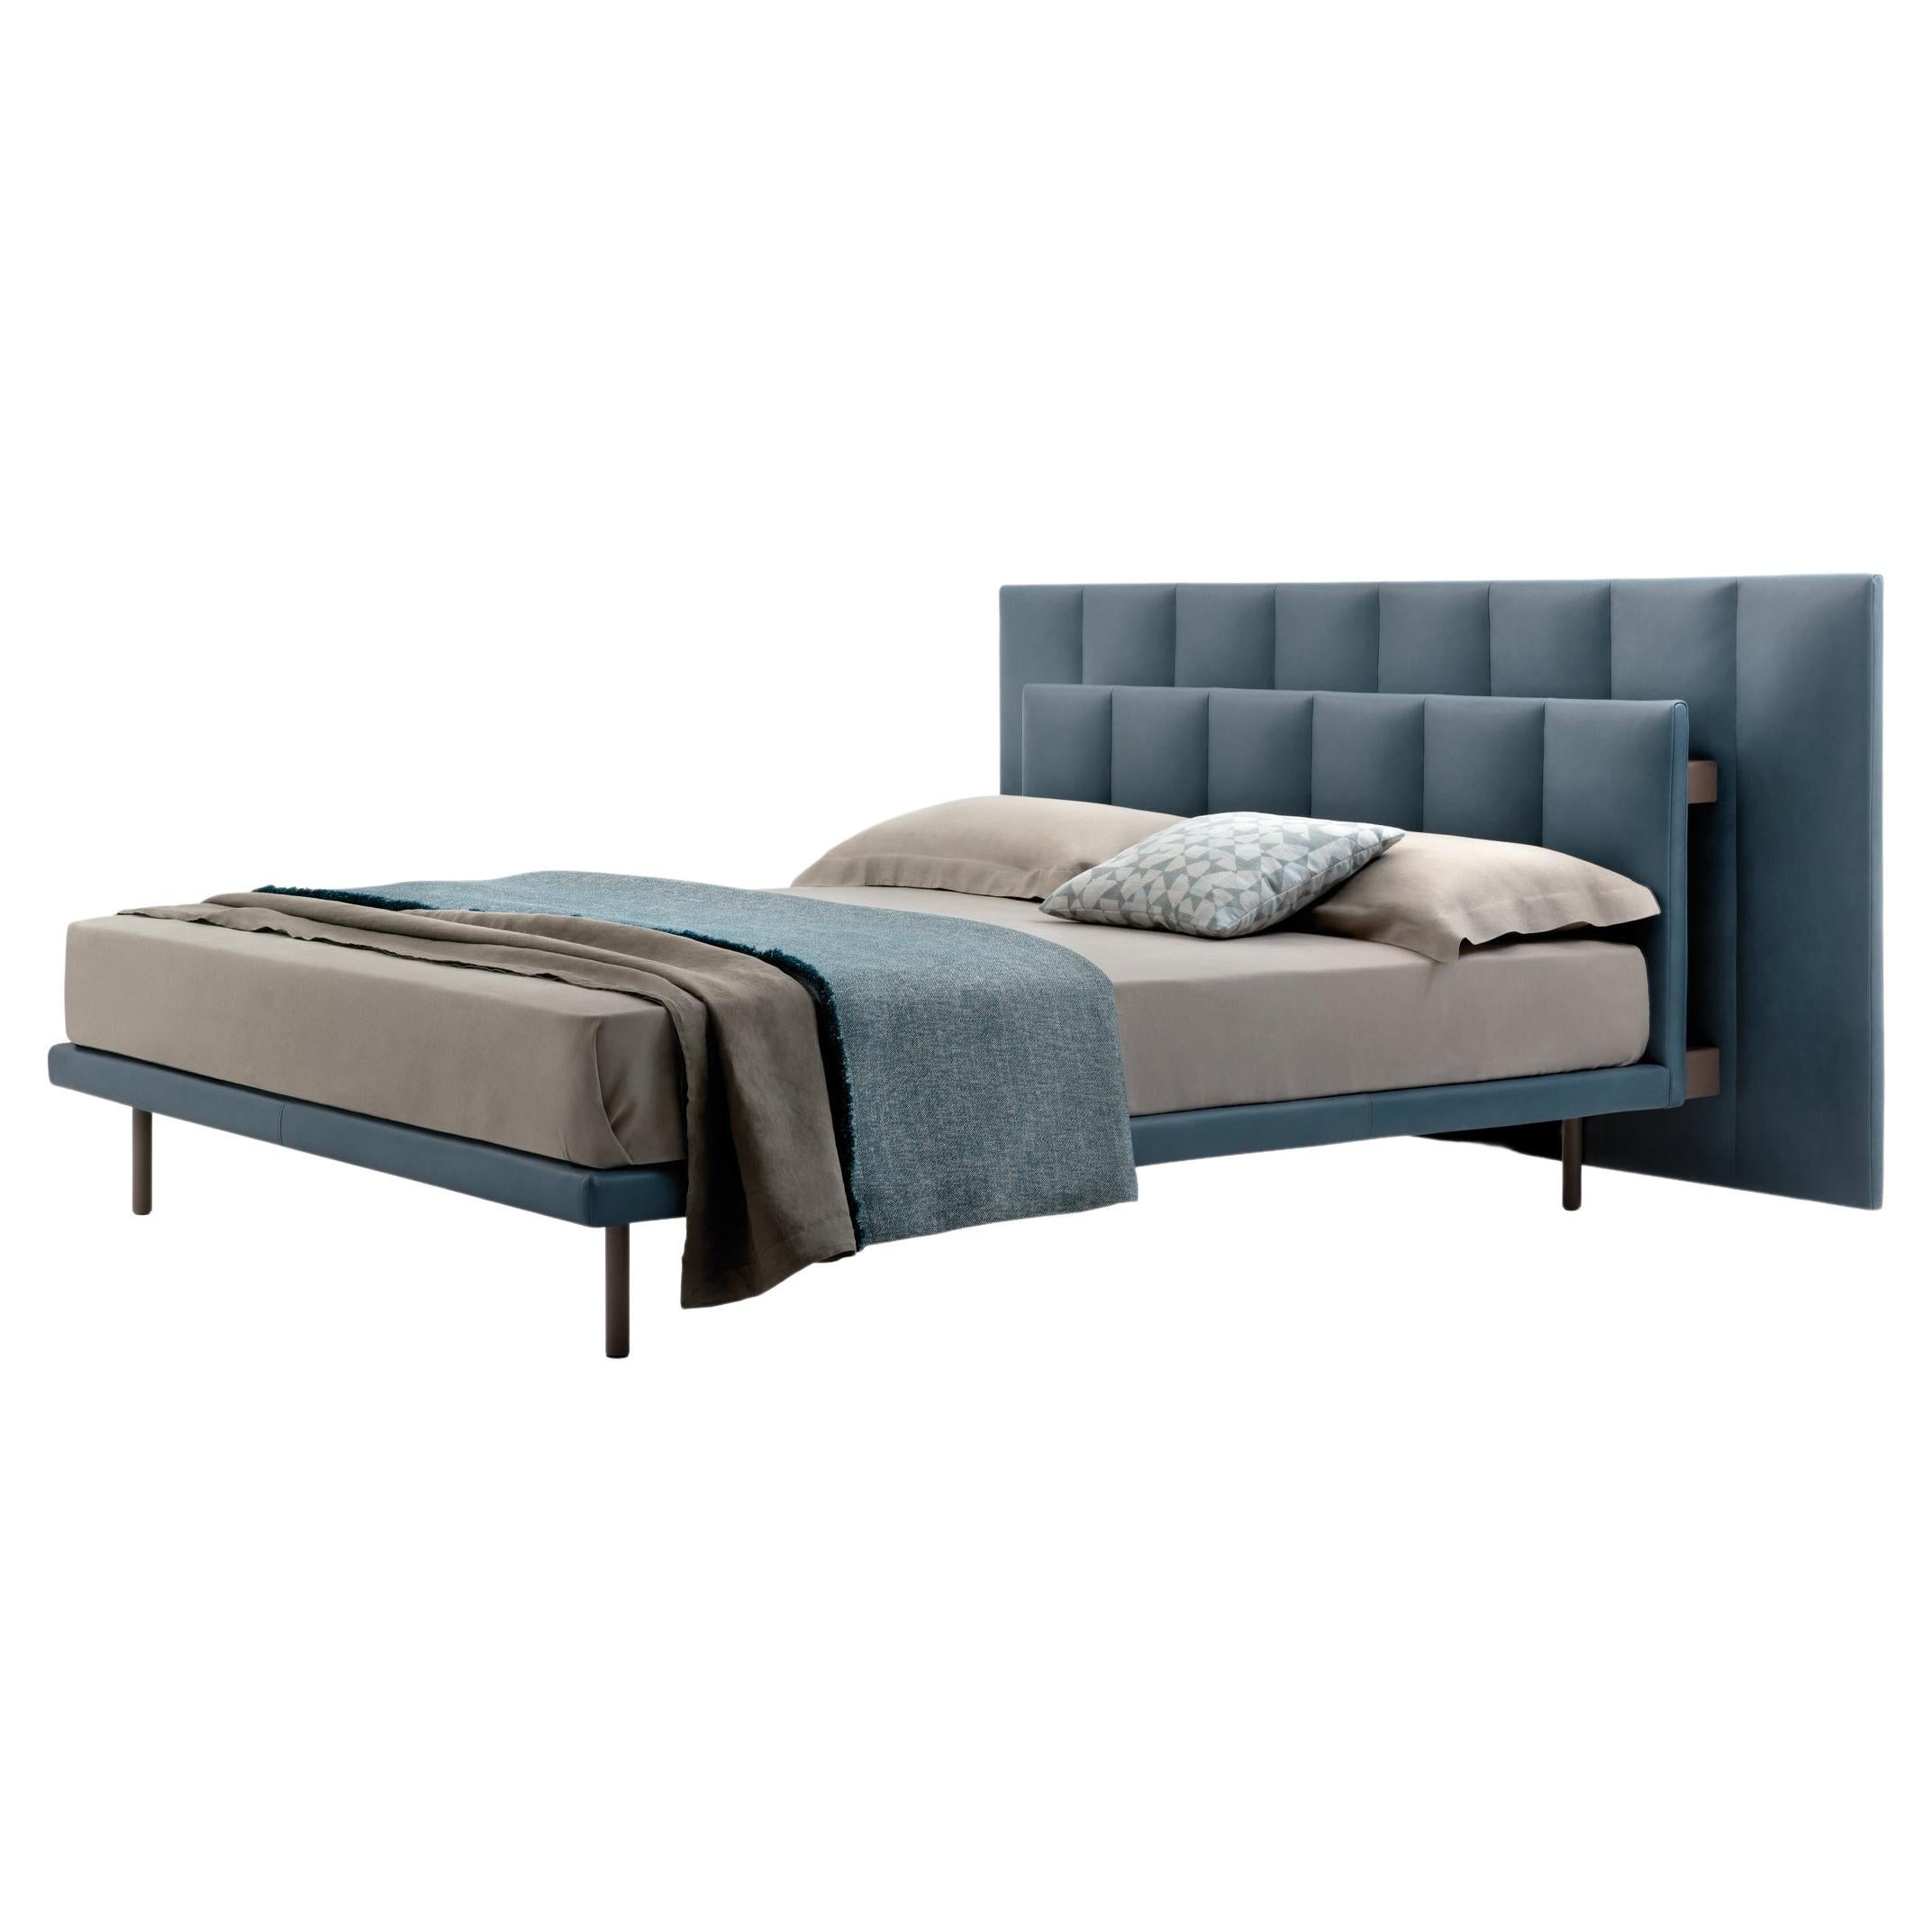 Zanotta Queen Size Grangala Bed with Single Springingin in Grey Upholstery